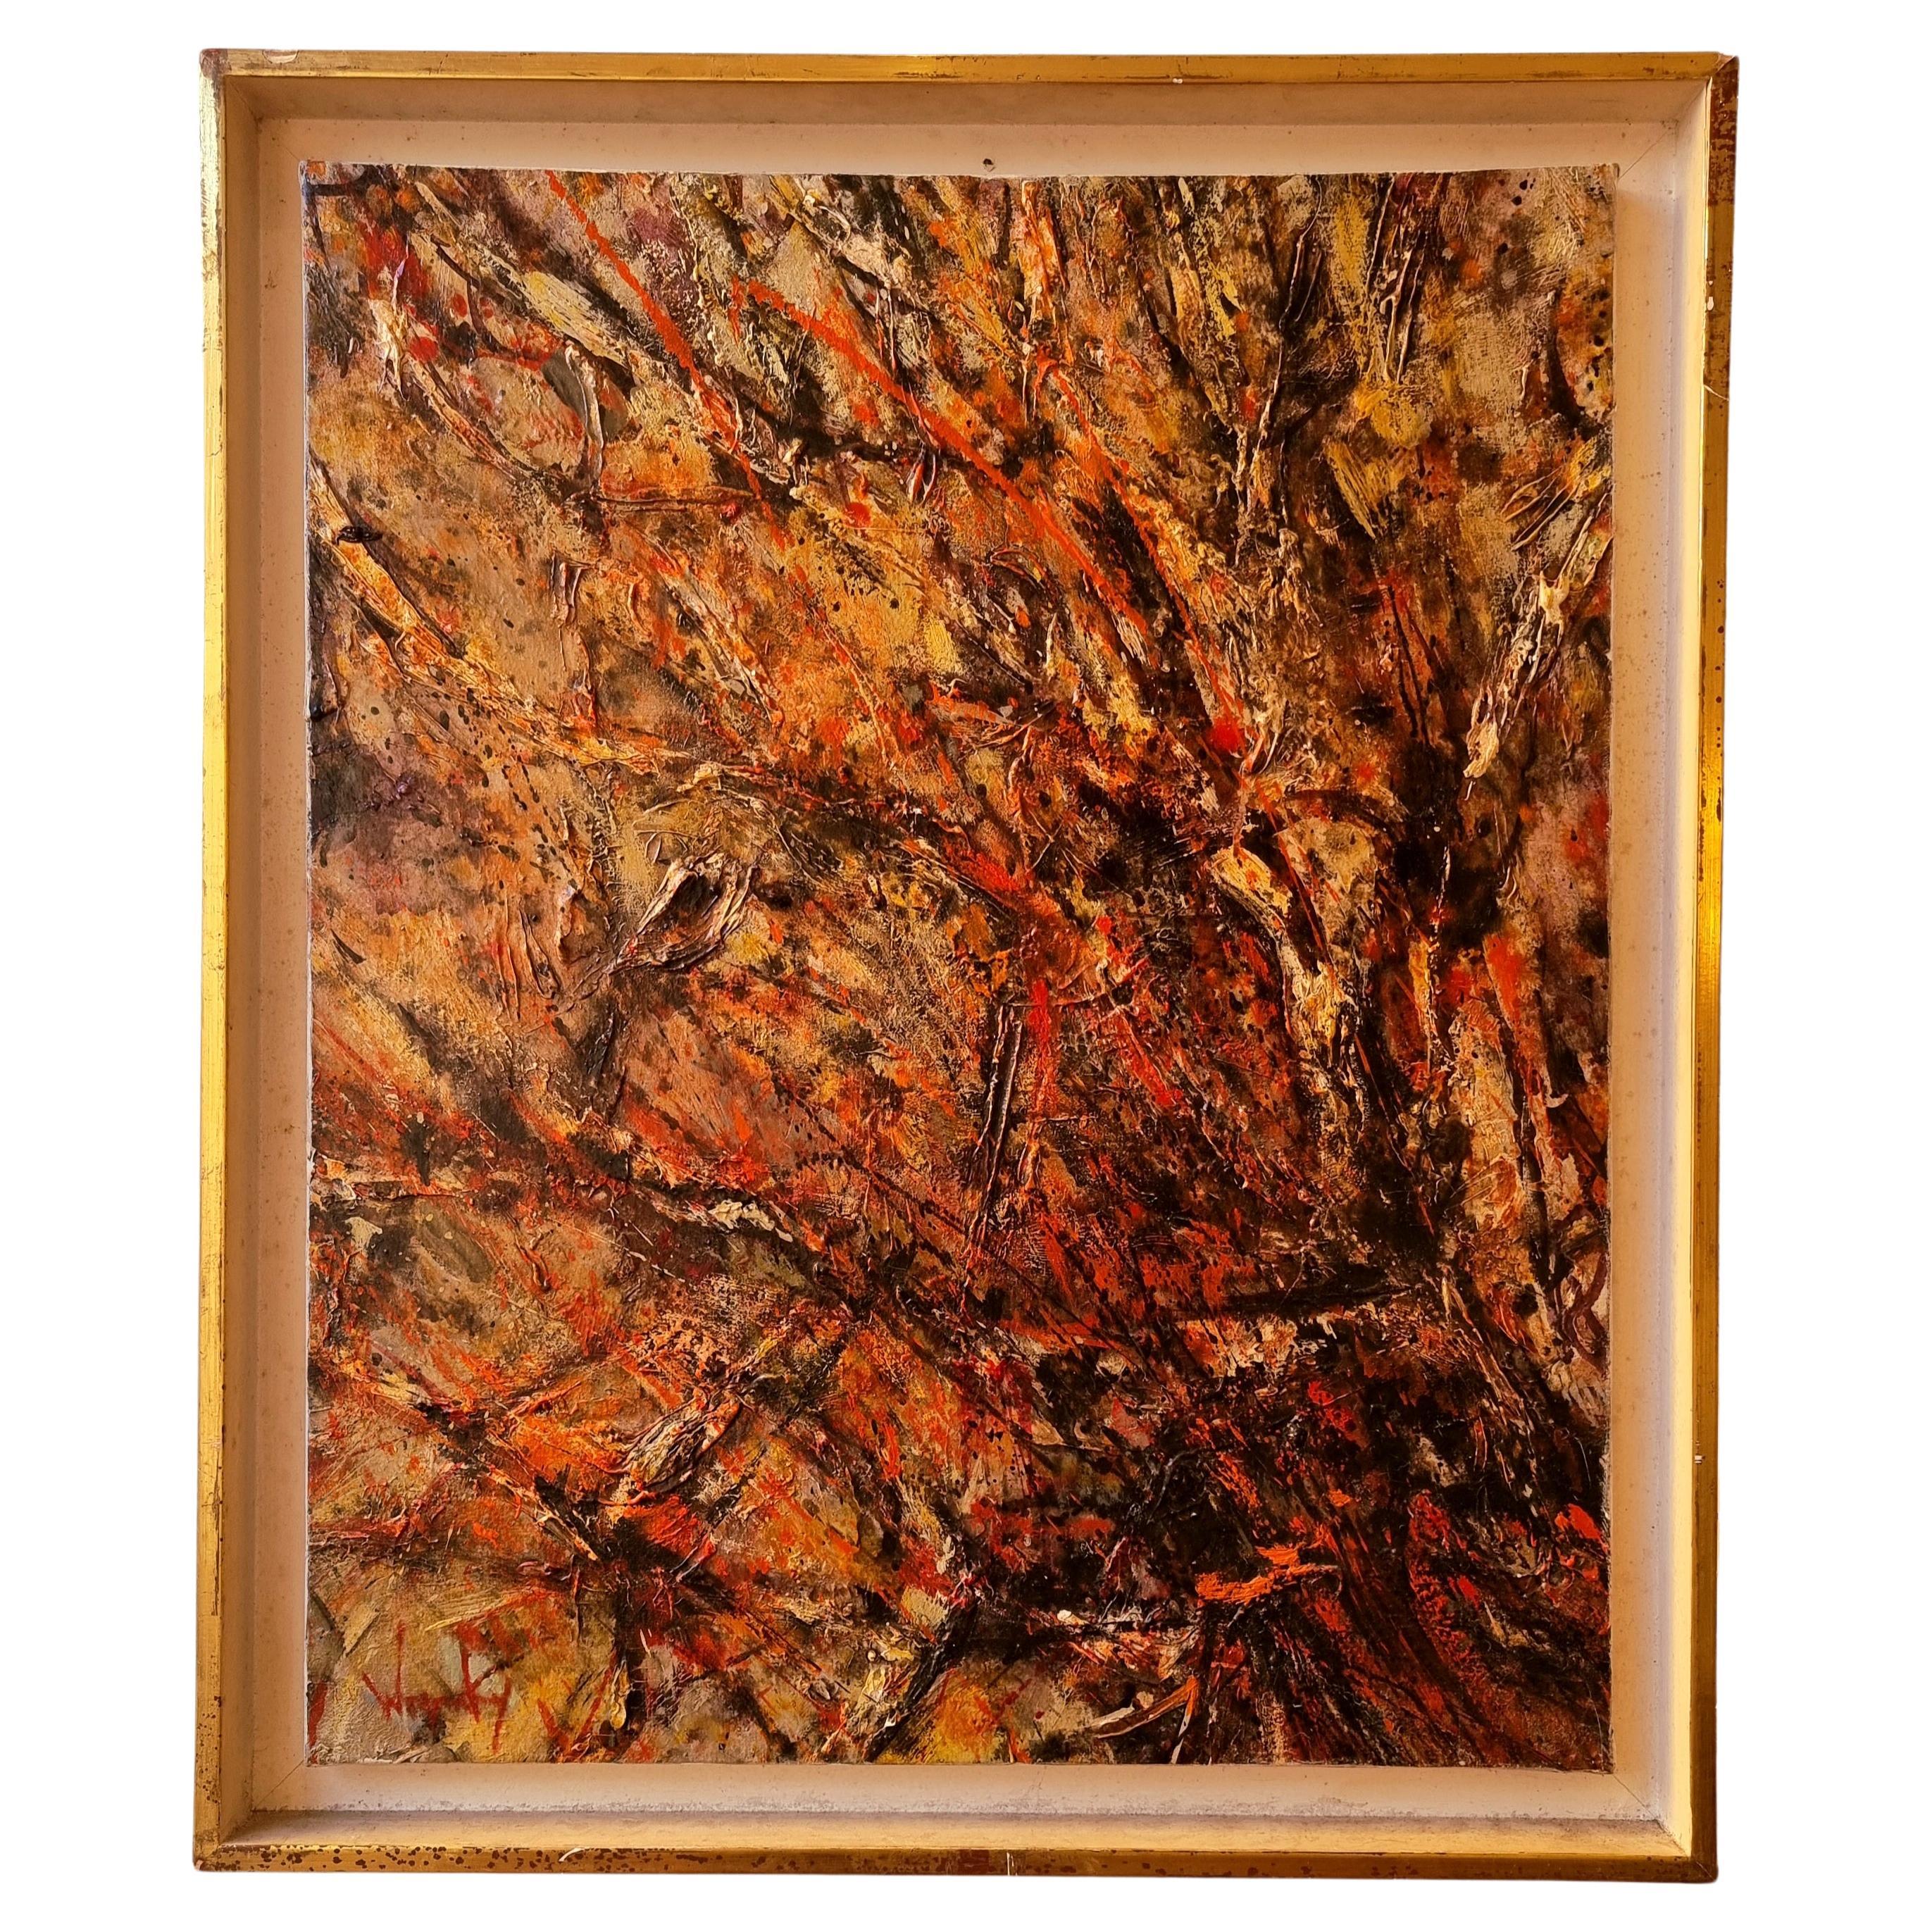 Abstract Painting, "Tree of Fire" by Robert Wogensky, Oil on Canvas, Ca 1960 For Sale